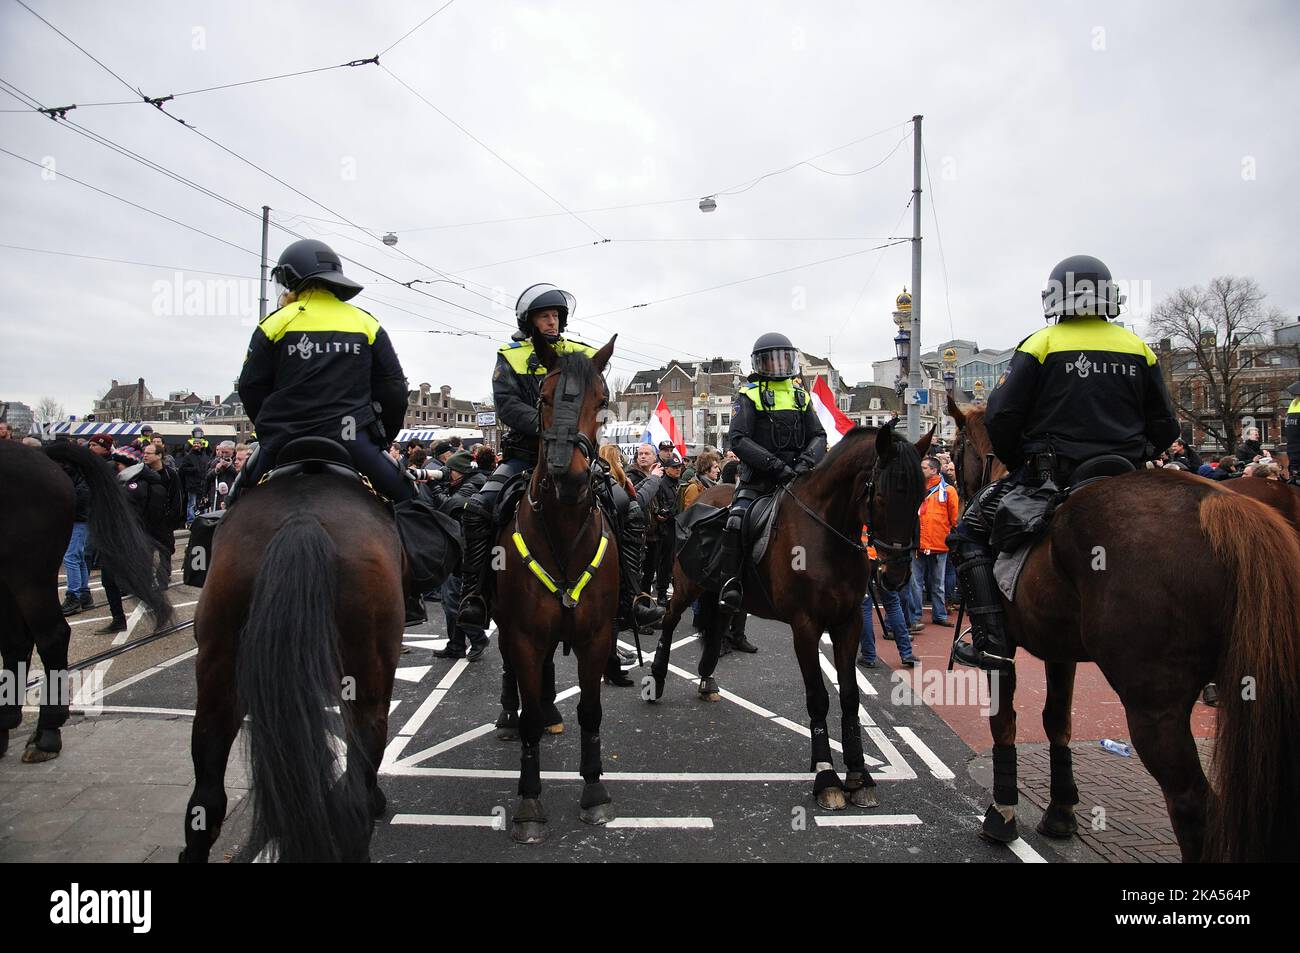 02-06-2016.Amsterdam,The Netherlands.Anti islam movement 'Pegida' protesting. Left wing counter-protesters tried to disrupt,but were stopped by riot police.Over 20 arrests were made. Stock Photo